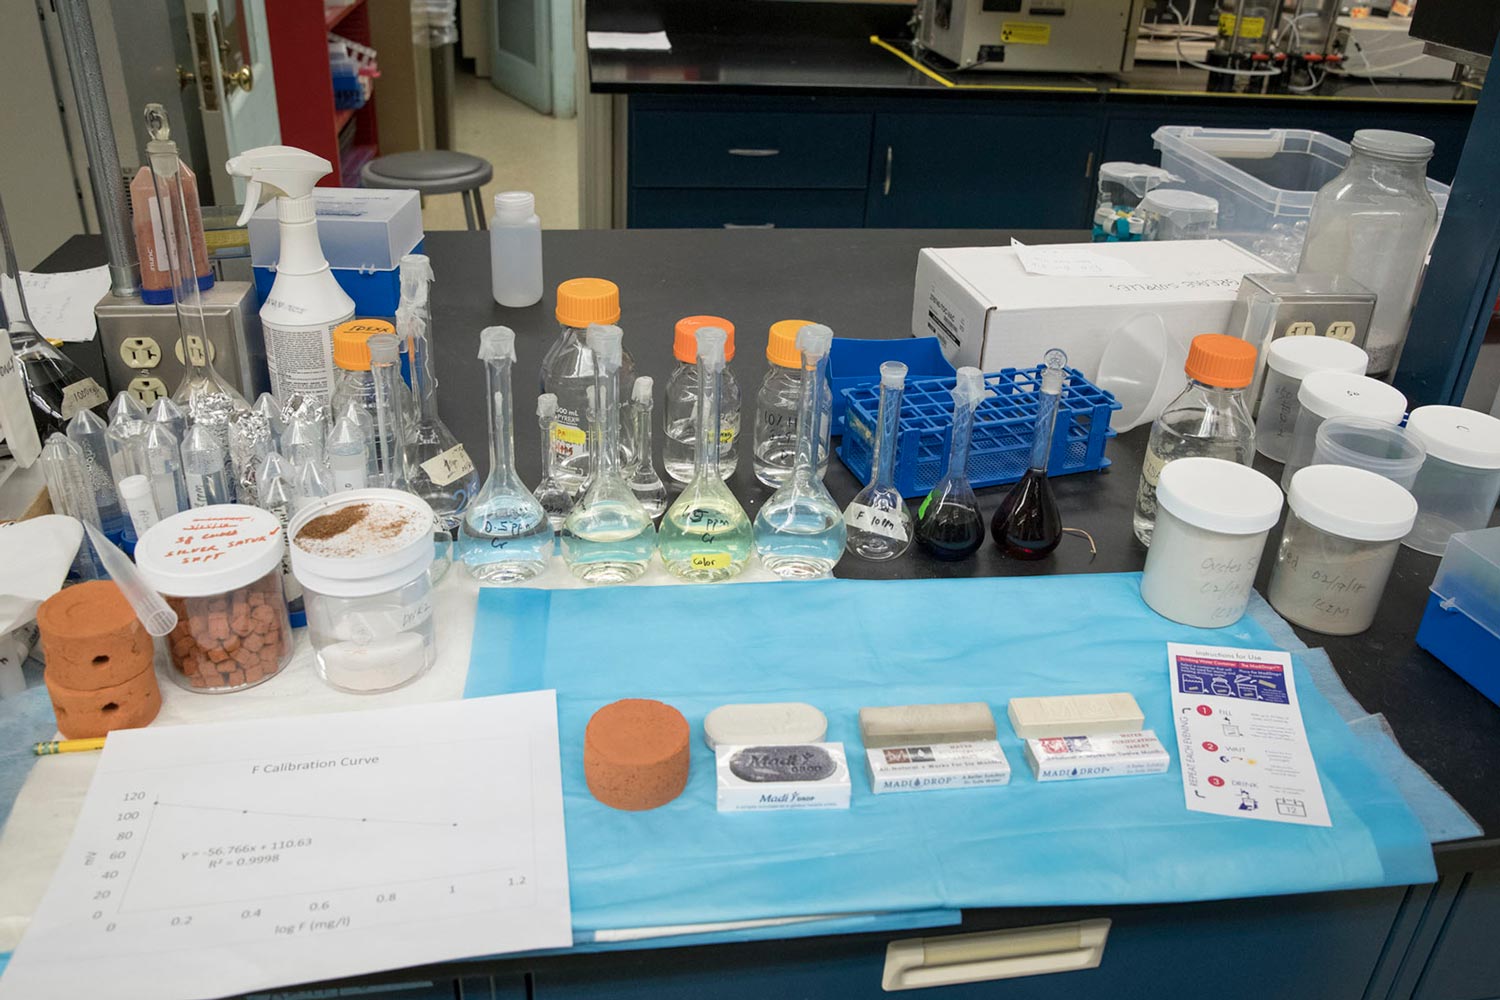 Lab table setup for an experiment